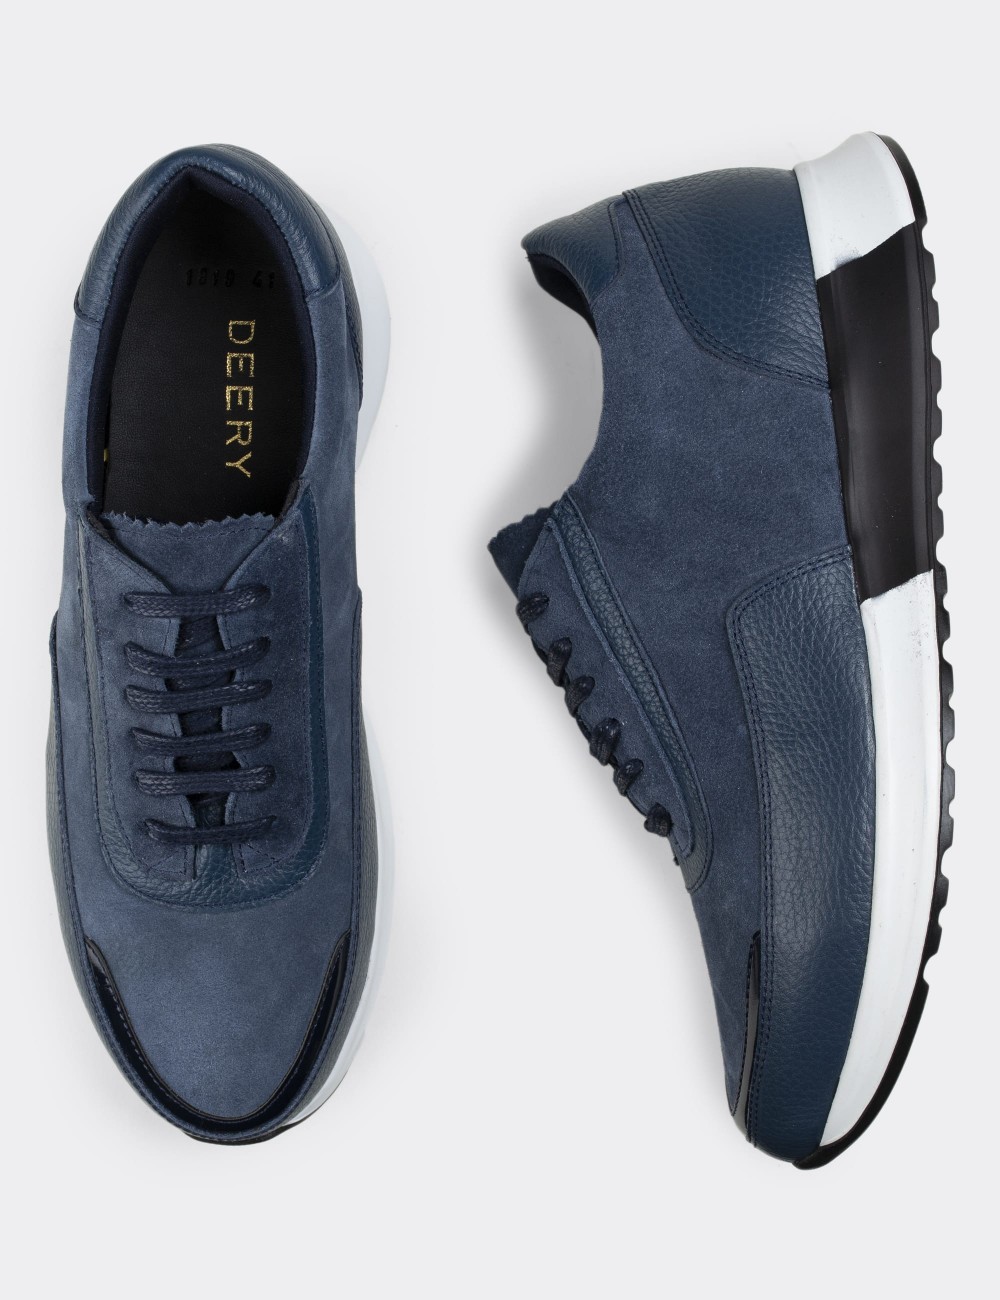 Blue Suede Leather Sneakers - 01819MMVIE02